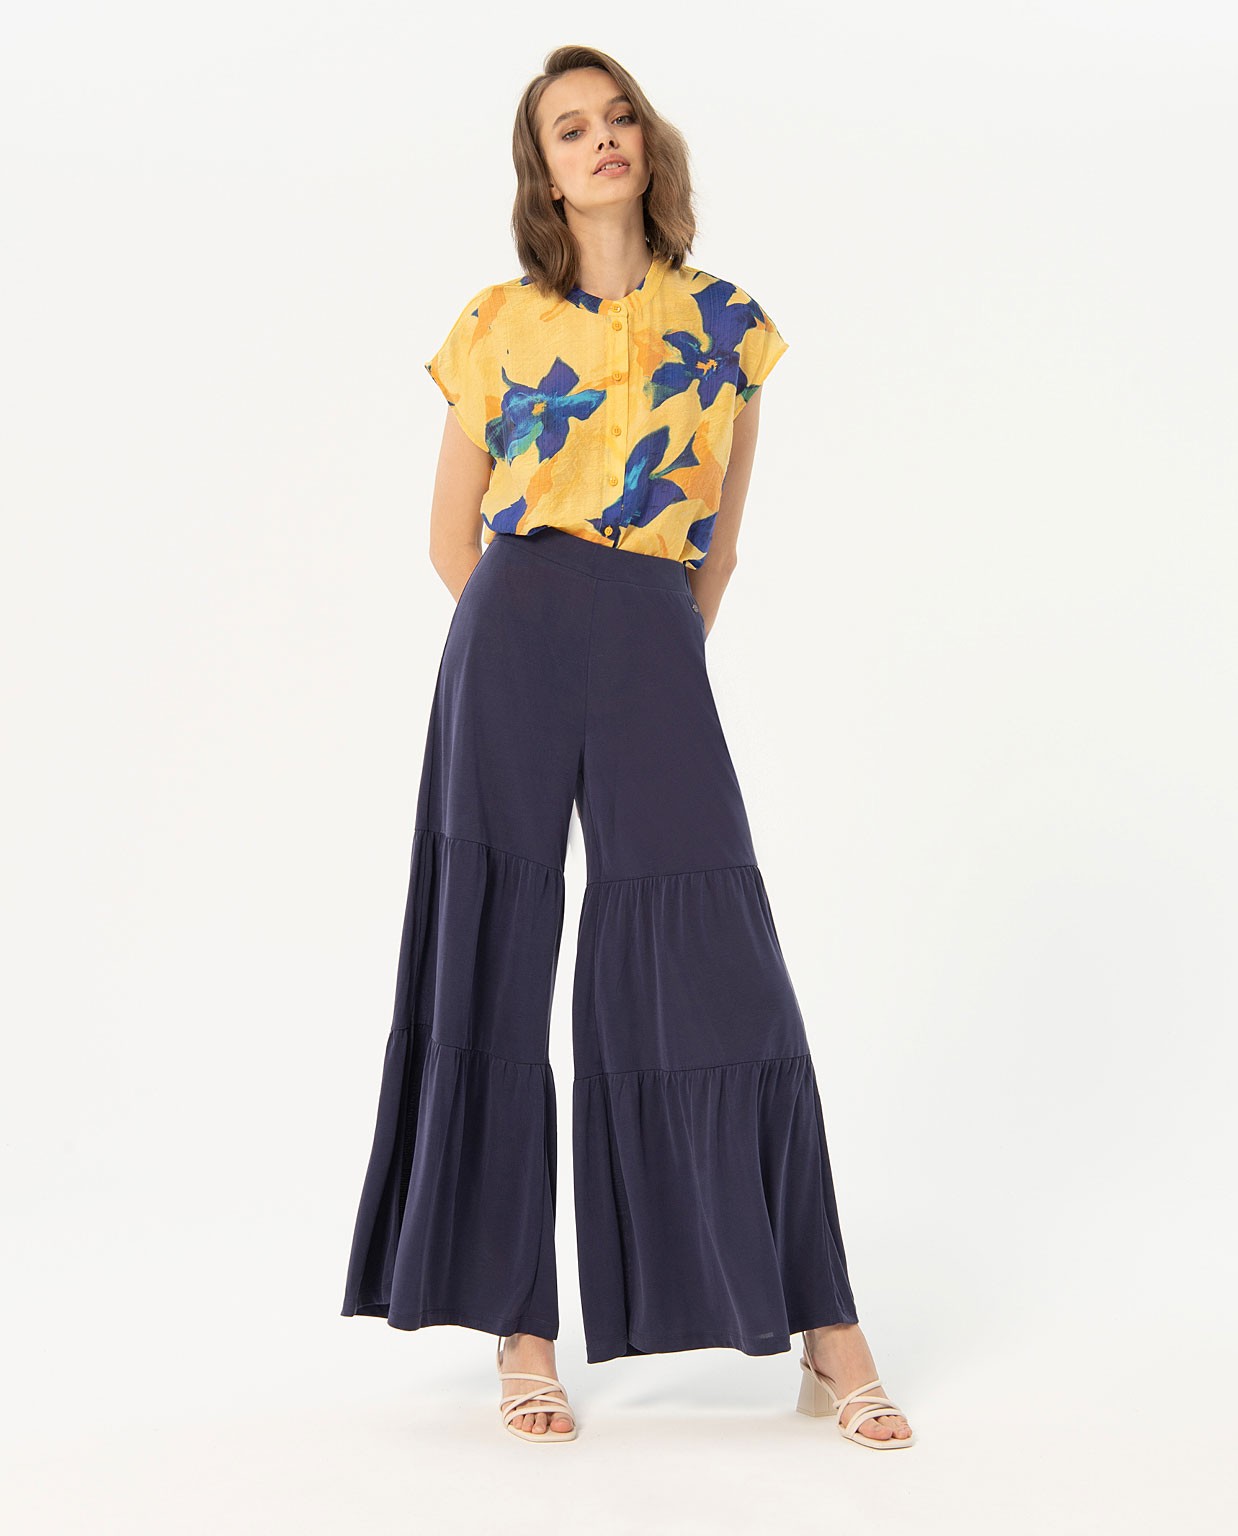 Long pants with ruffles, smooth Navy blue